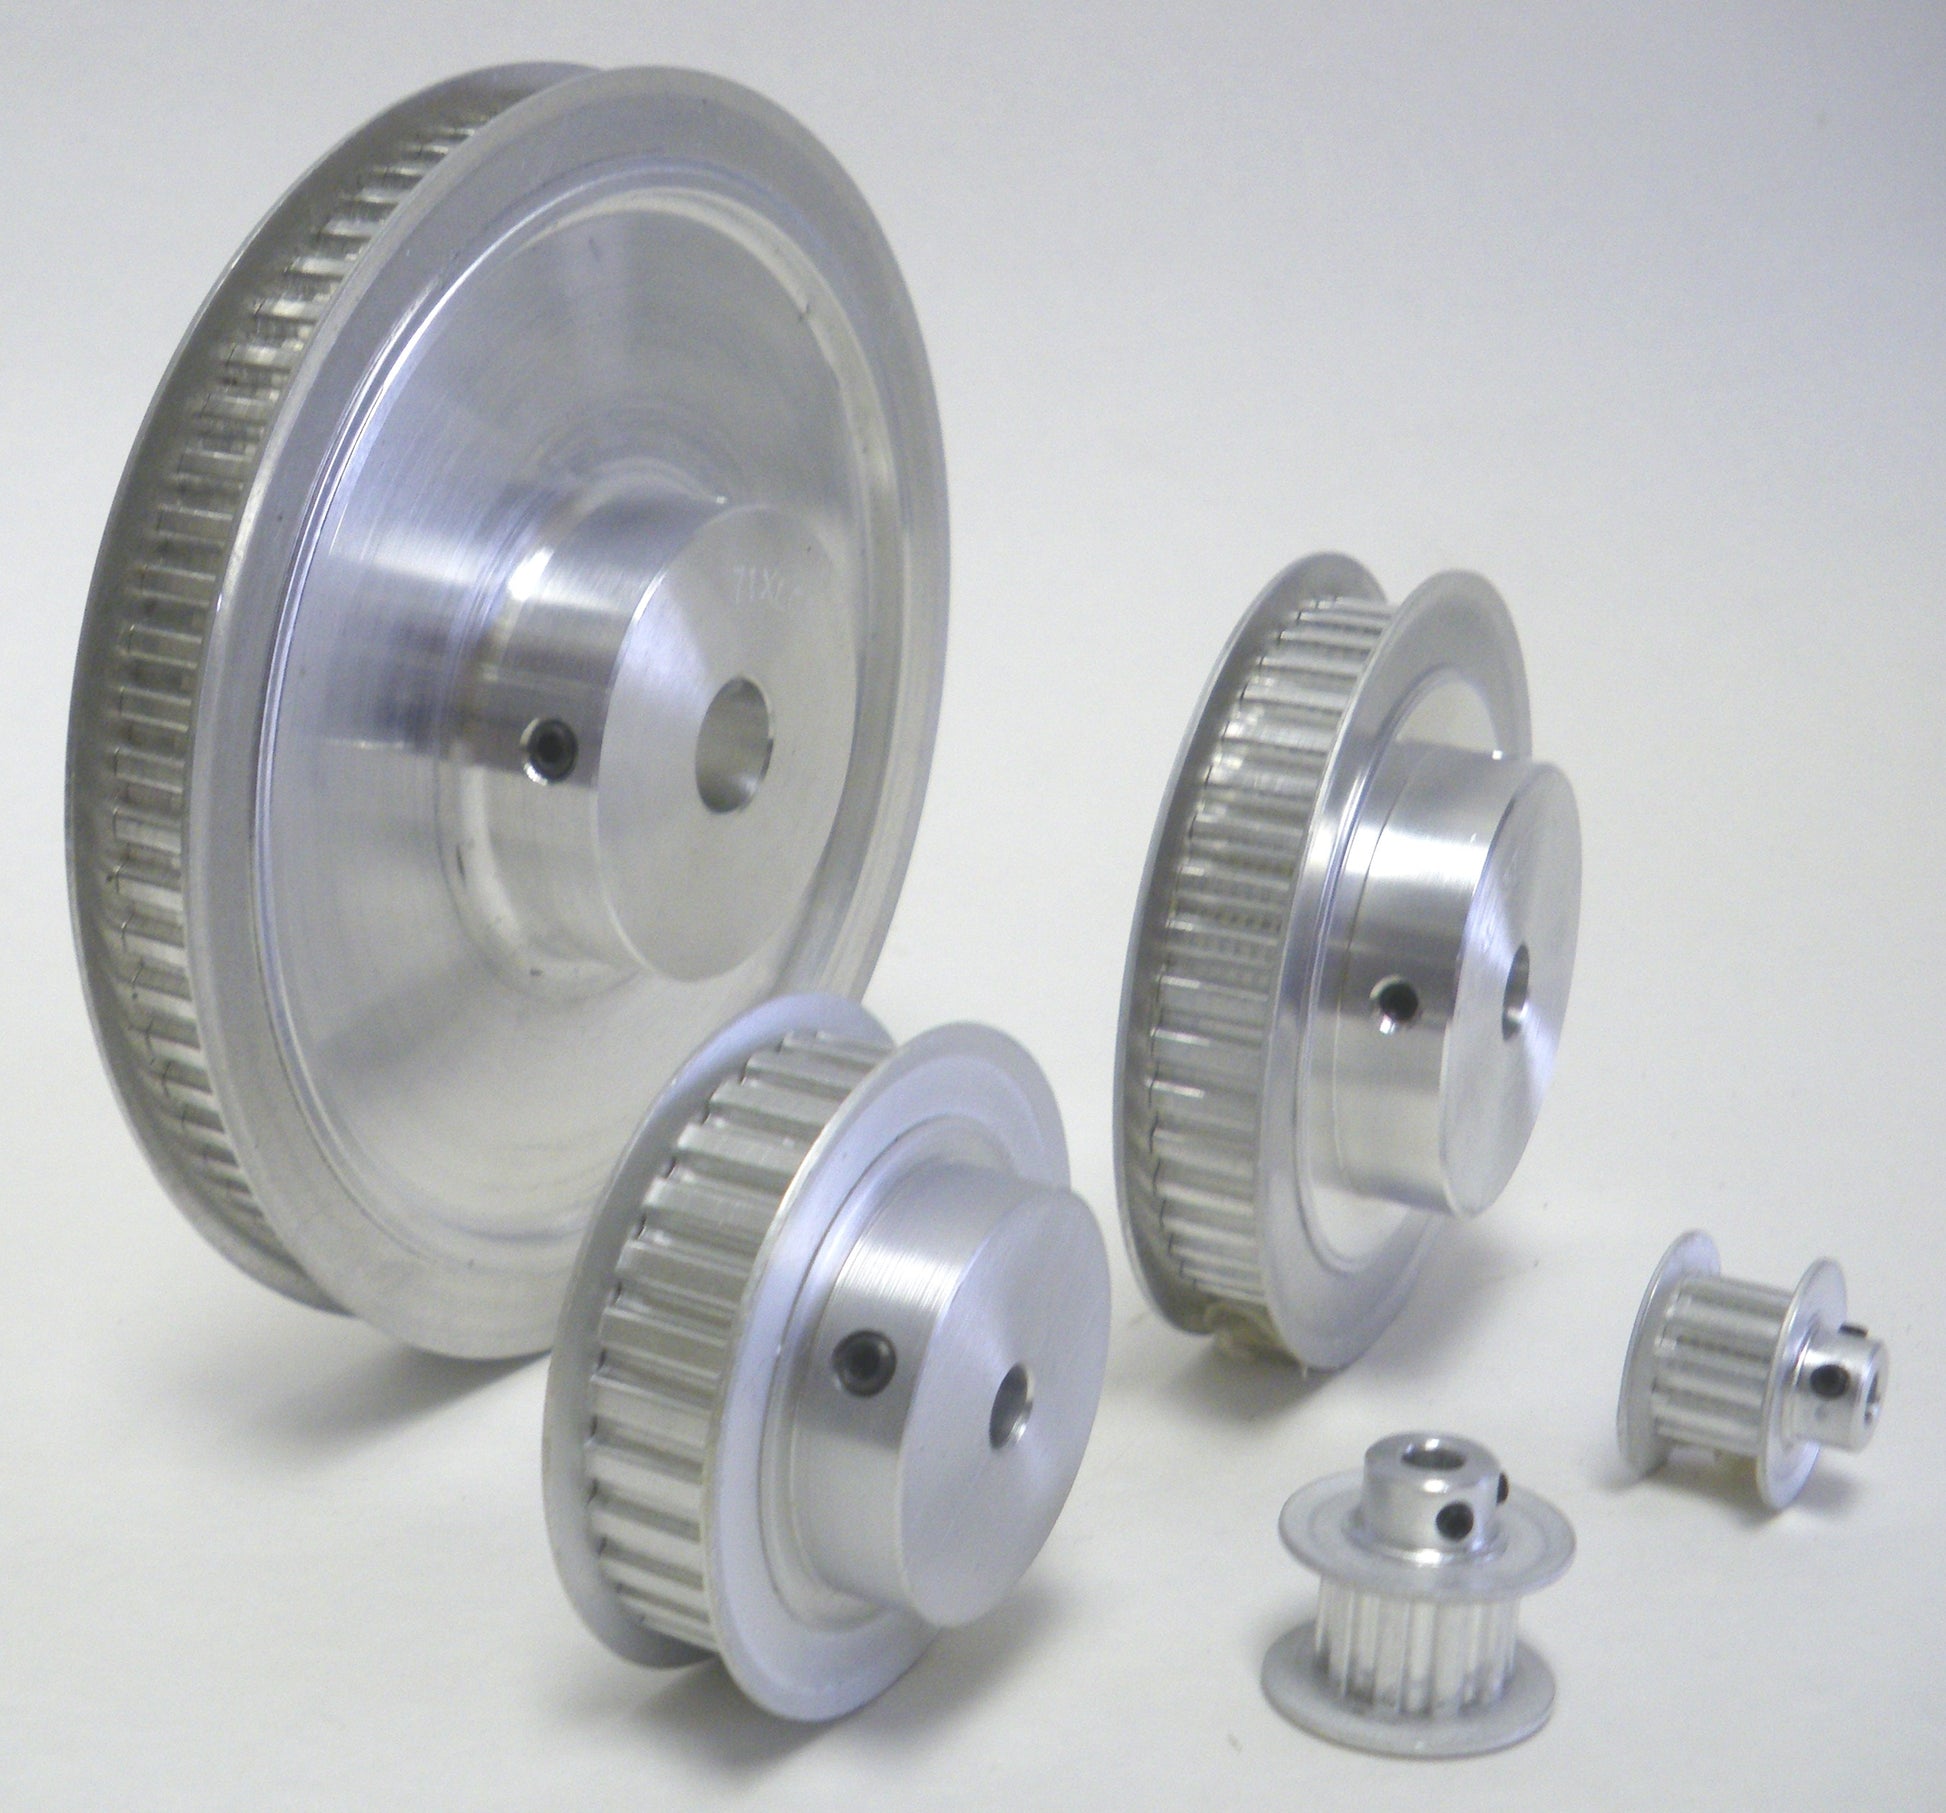 36XL037 36 Tooth Aluminum Pulley